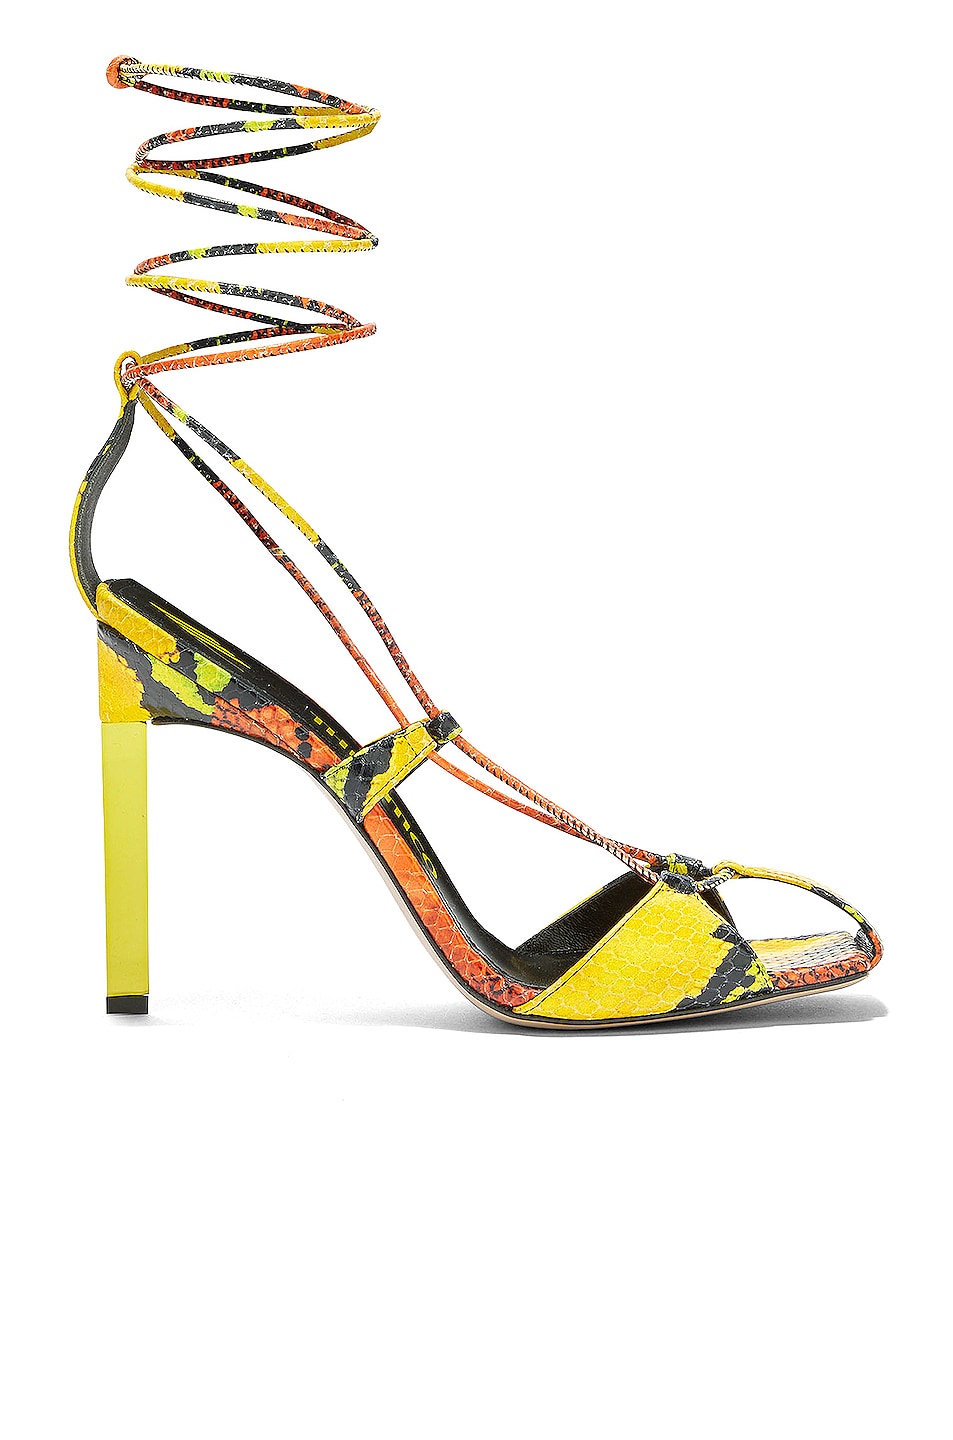 Image 1 of THE ATTICO Adele Lace Up Pump in Orange, Black, Yellow, & Green